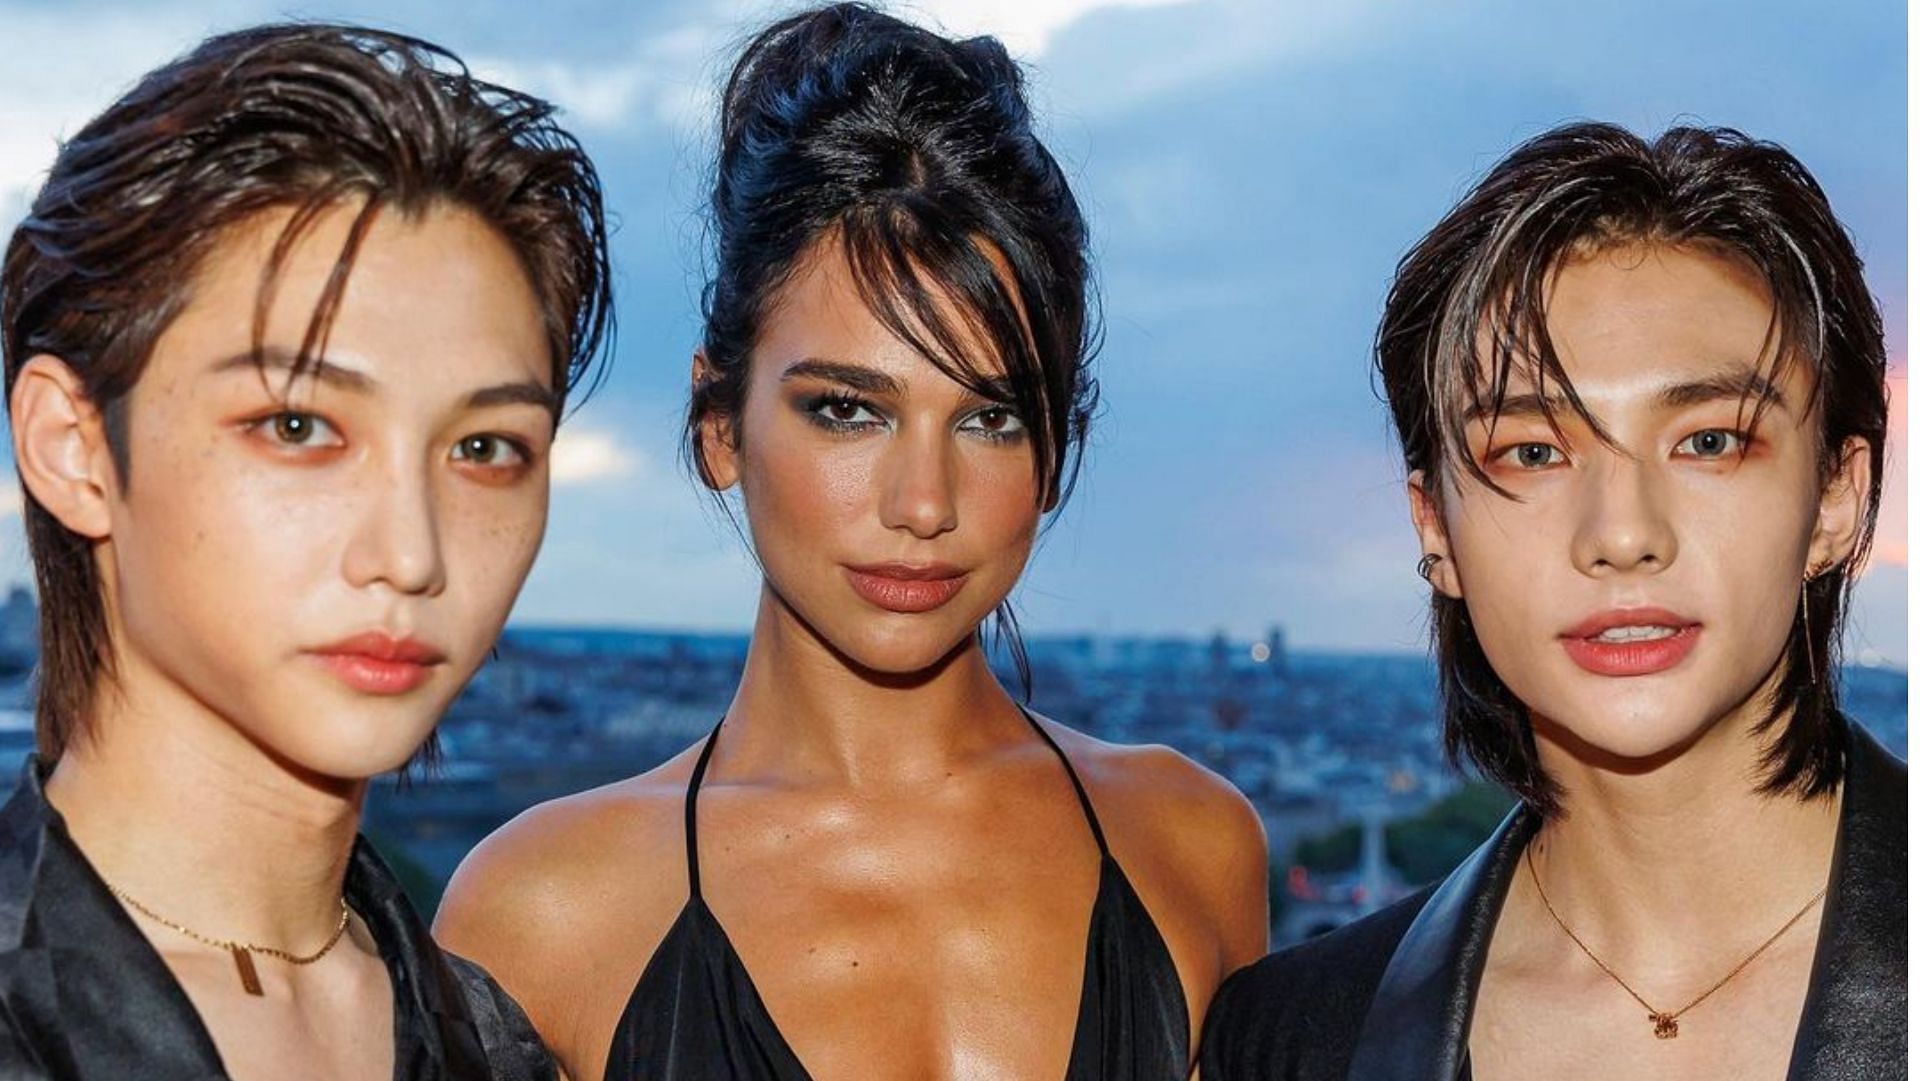 Stray Kids members Felix and Hyunjin appear in the same frame with Dua Lipa at the YSL Paris show. (Image via Instagram/@yslbeauty)